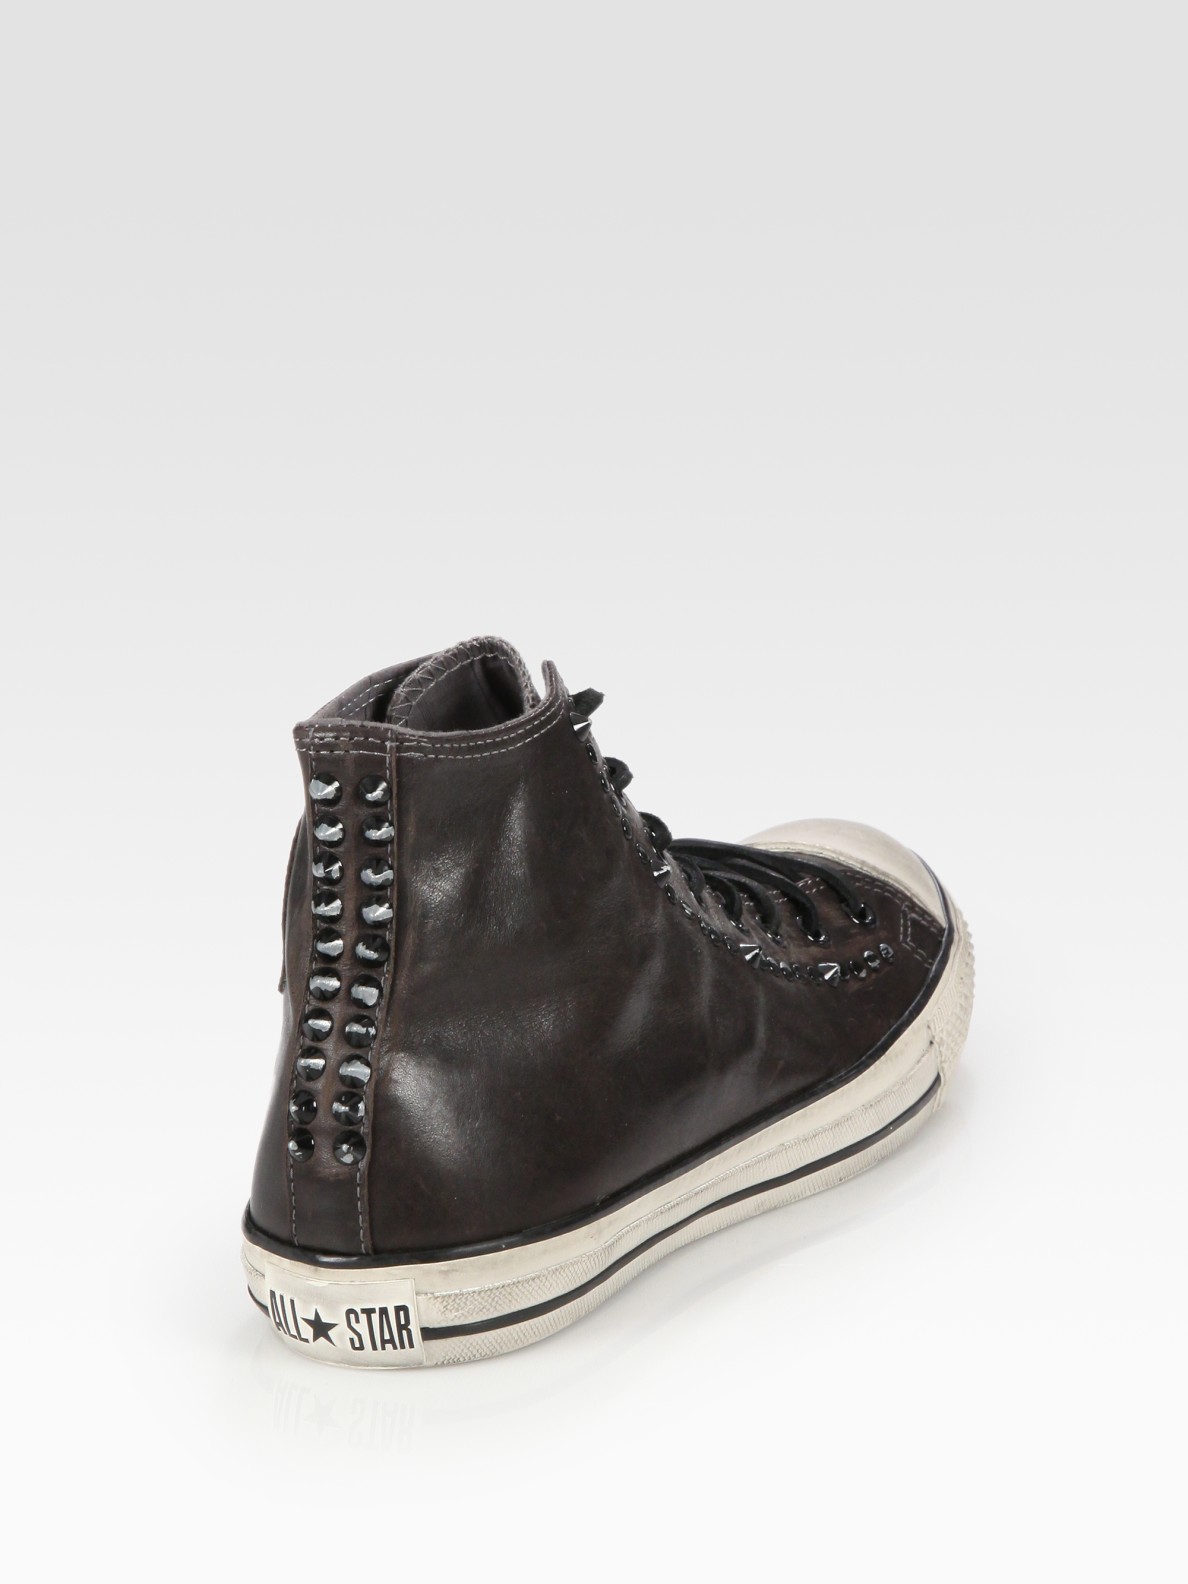 Converse Varvatos Studded Leather High-tops in Black Lyst